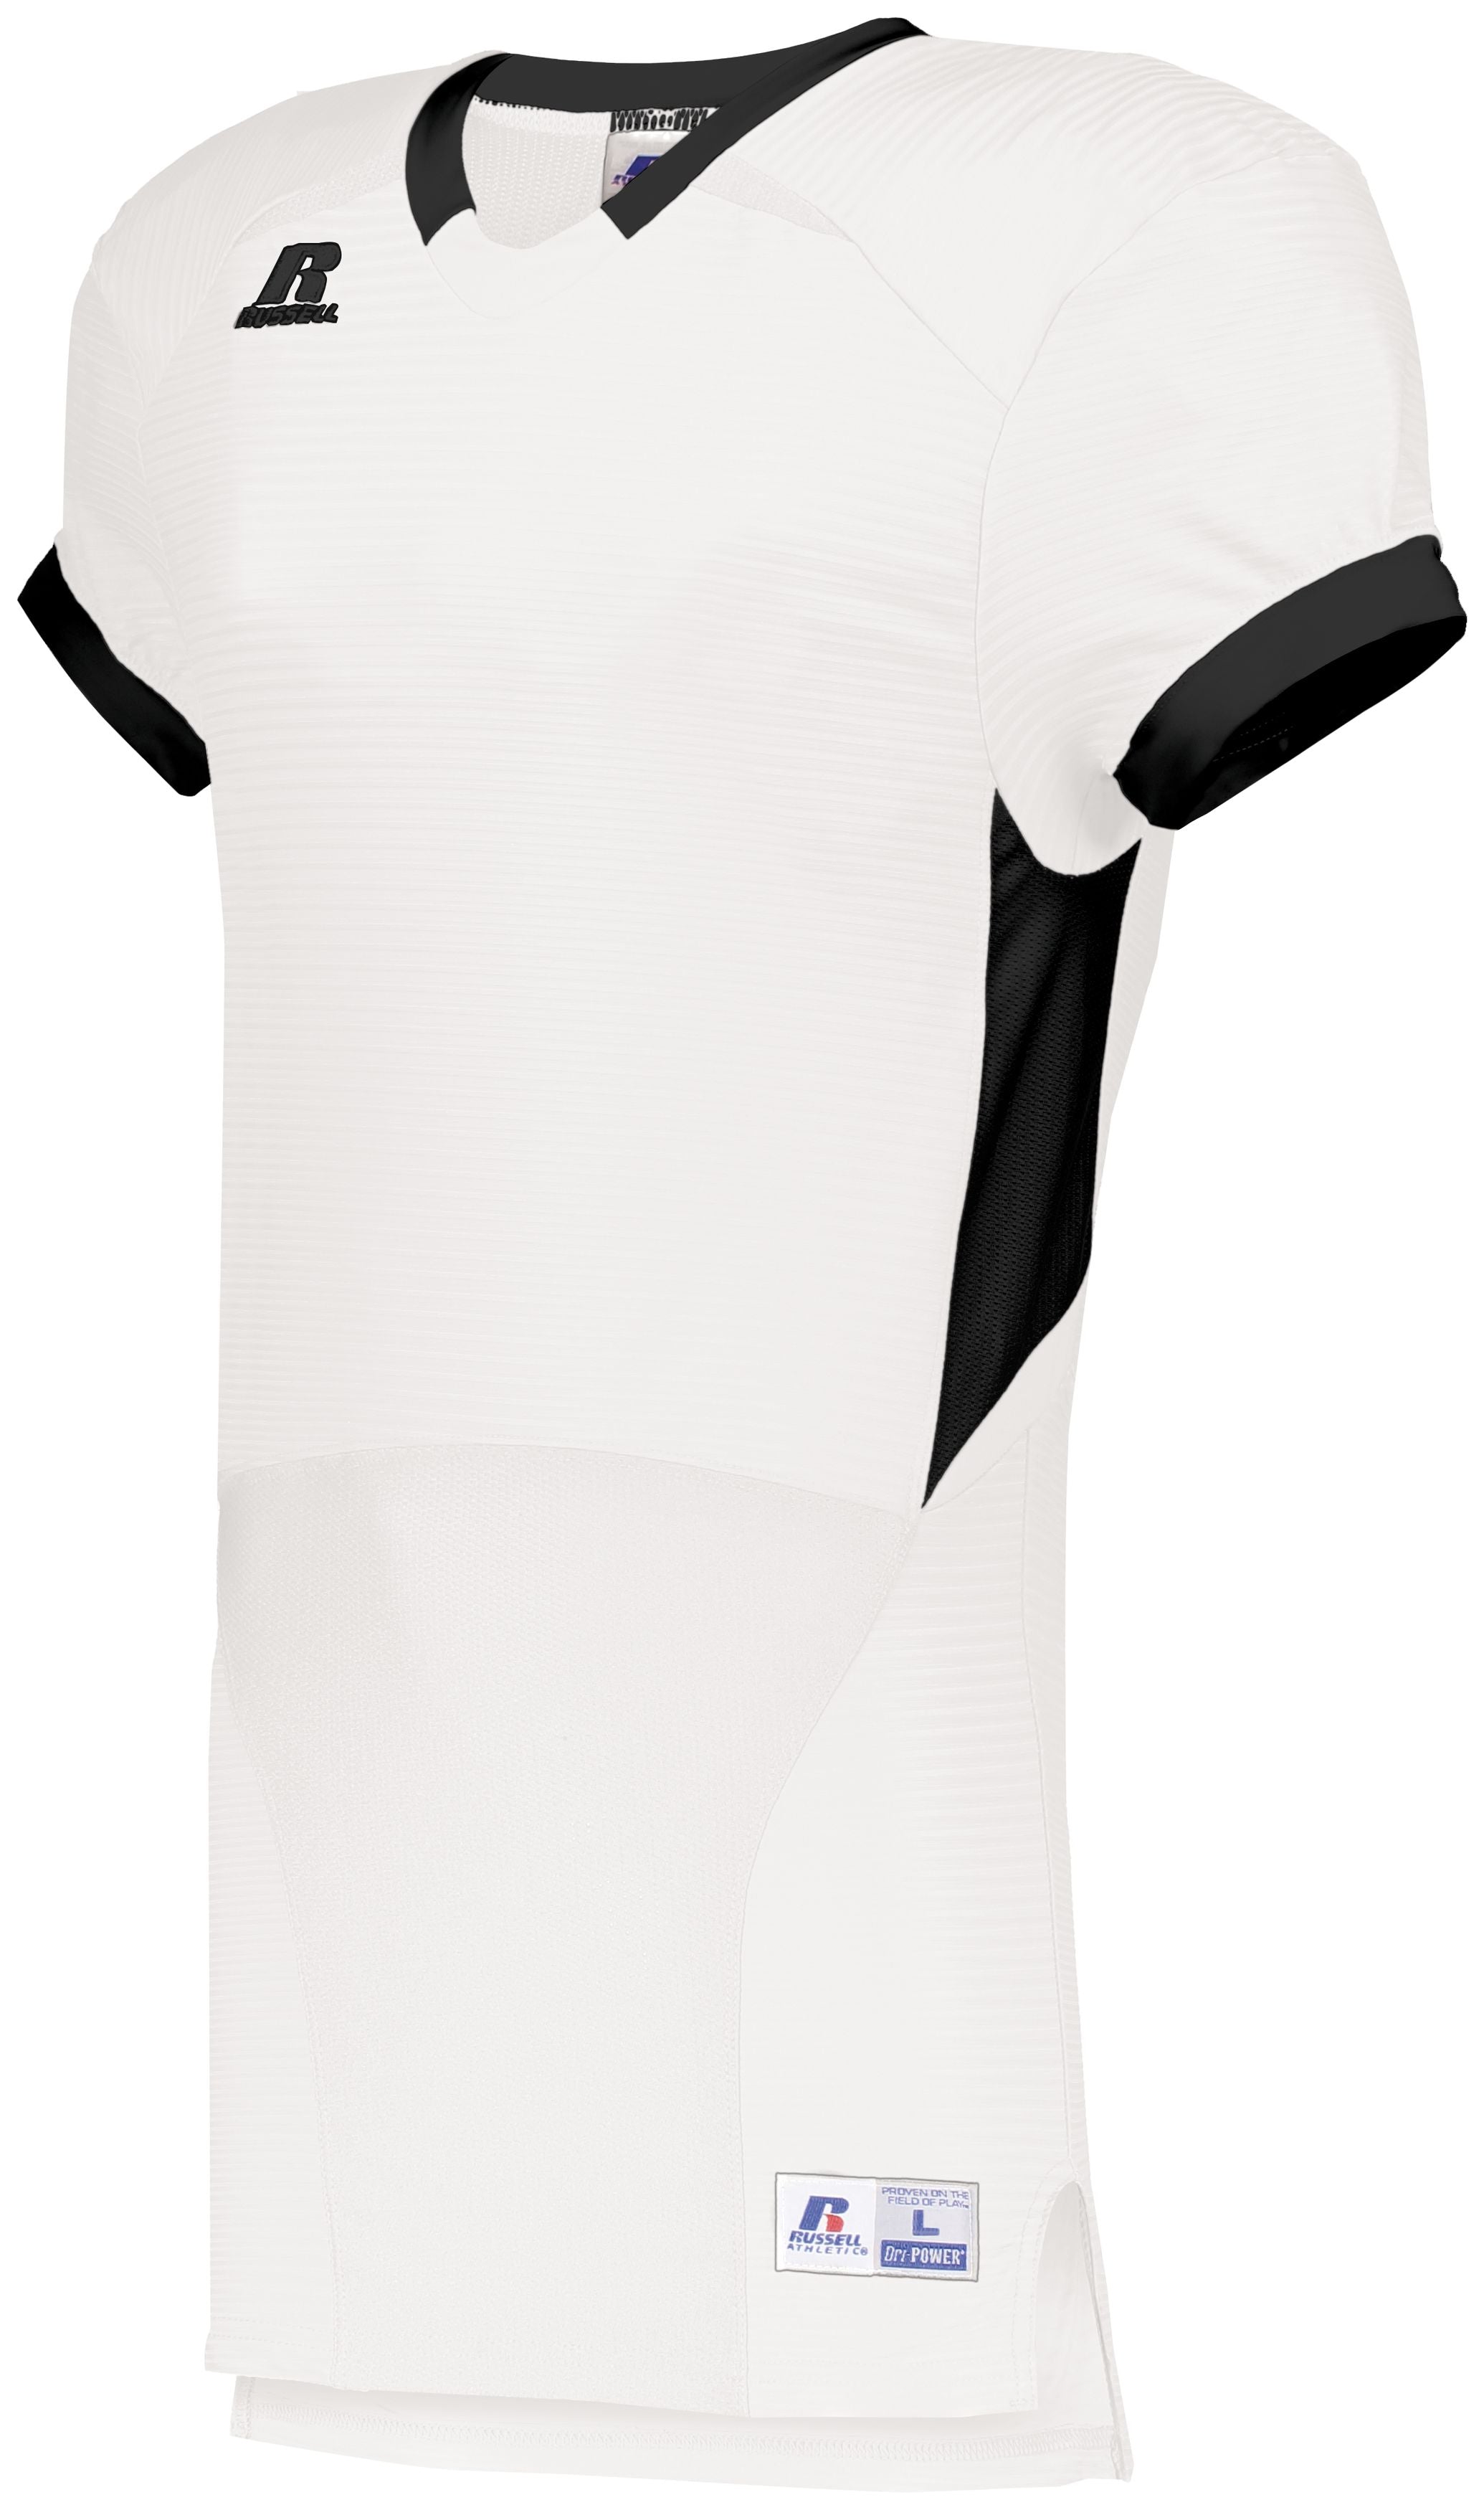 Russell Athletic Color Block Game Jersey in White/Black  -Part of the Adult, Adult-Jersey, Football, Russell-Athletic-Products, Shirts, All-Sports, All-Sports-1 product lines at KanaleyCreations.com